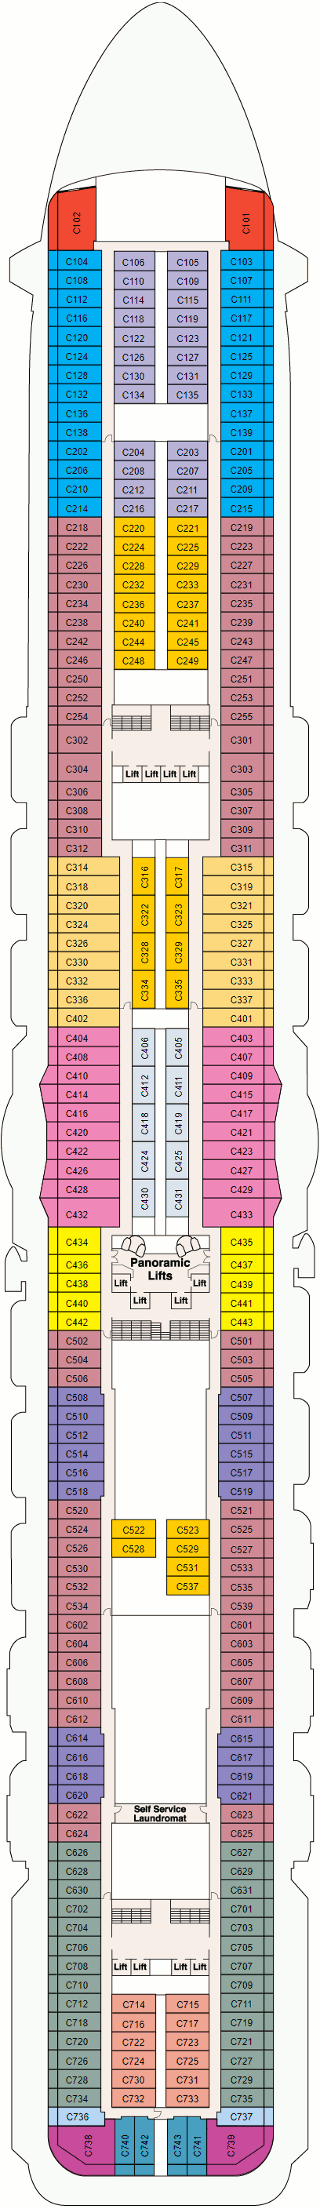 deck plans for princess cruise ships